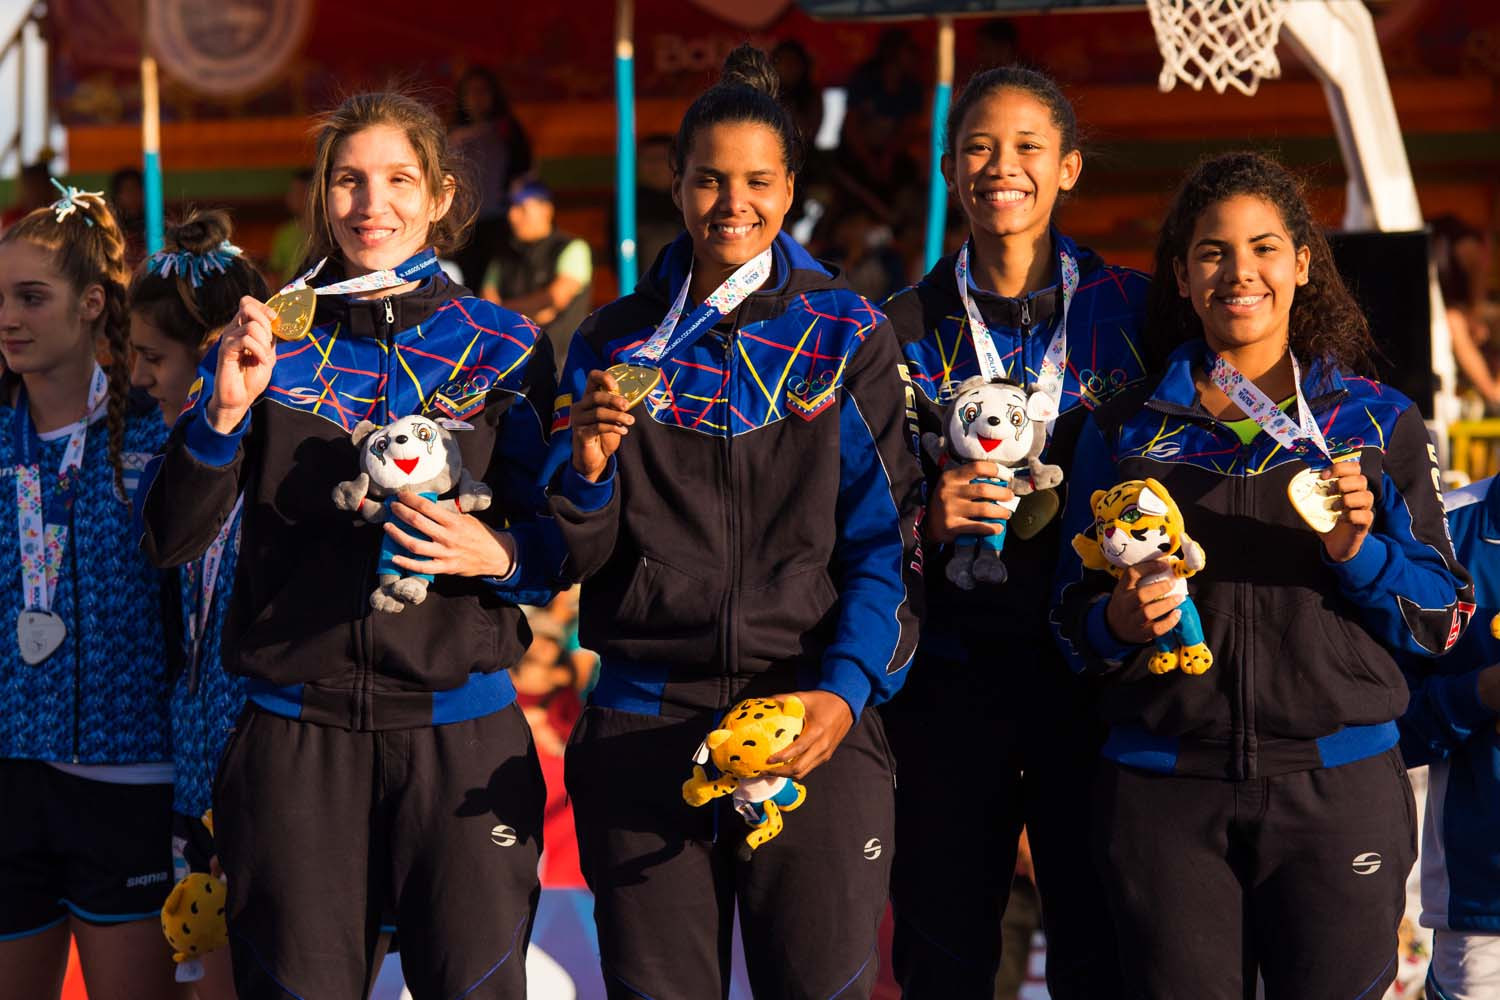 Venezuela beat Argentina to 3x3 basketball gold at South American Games